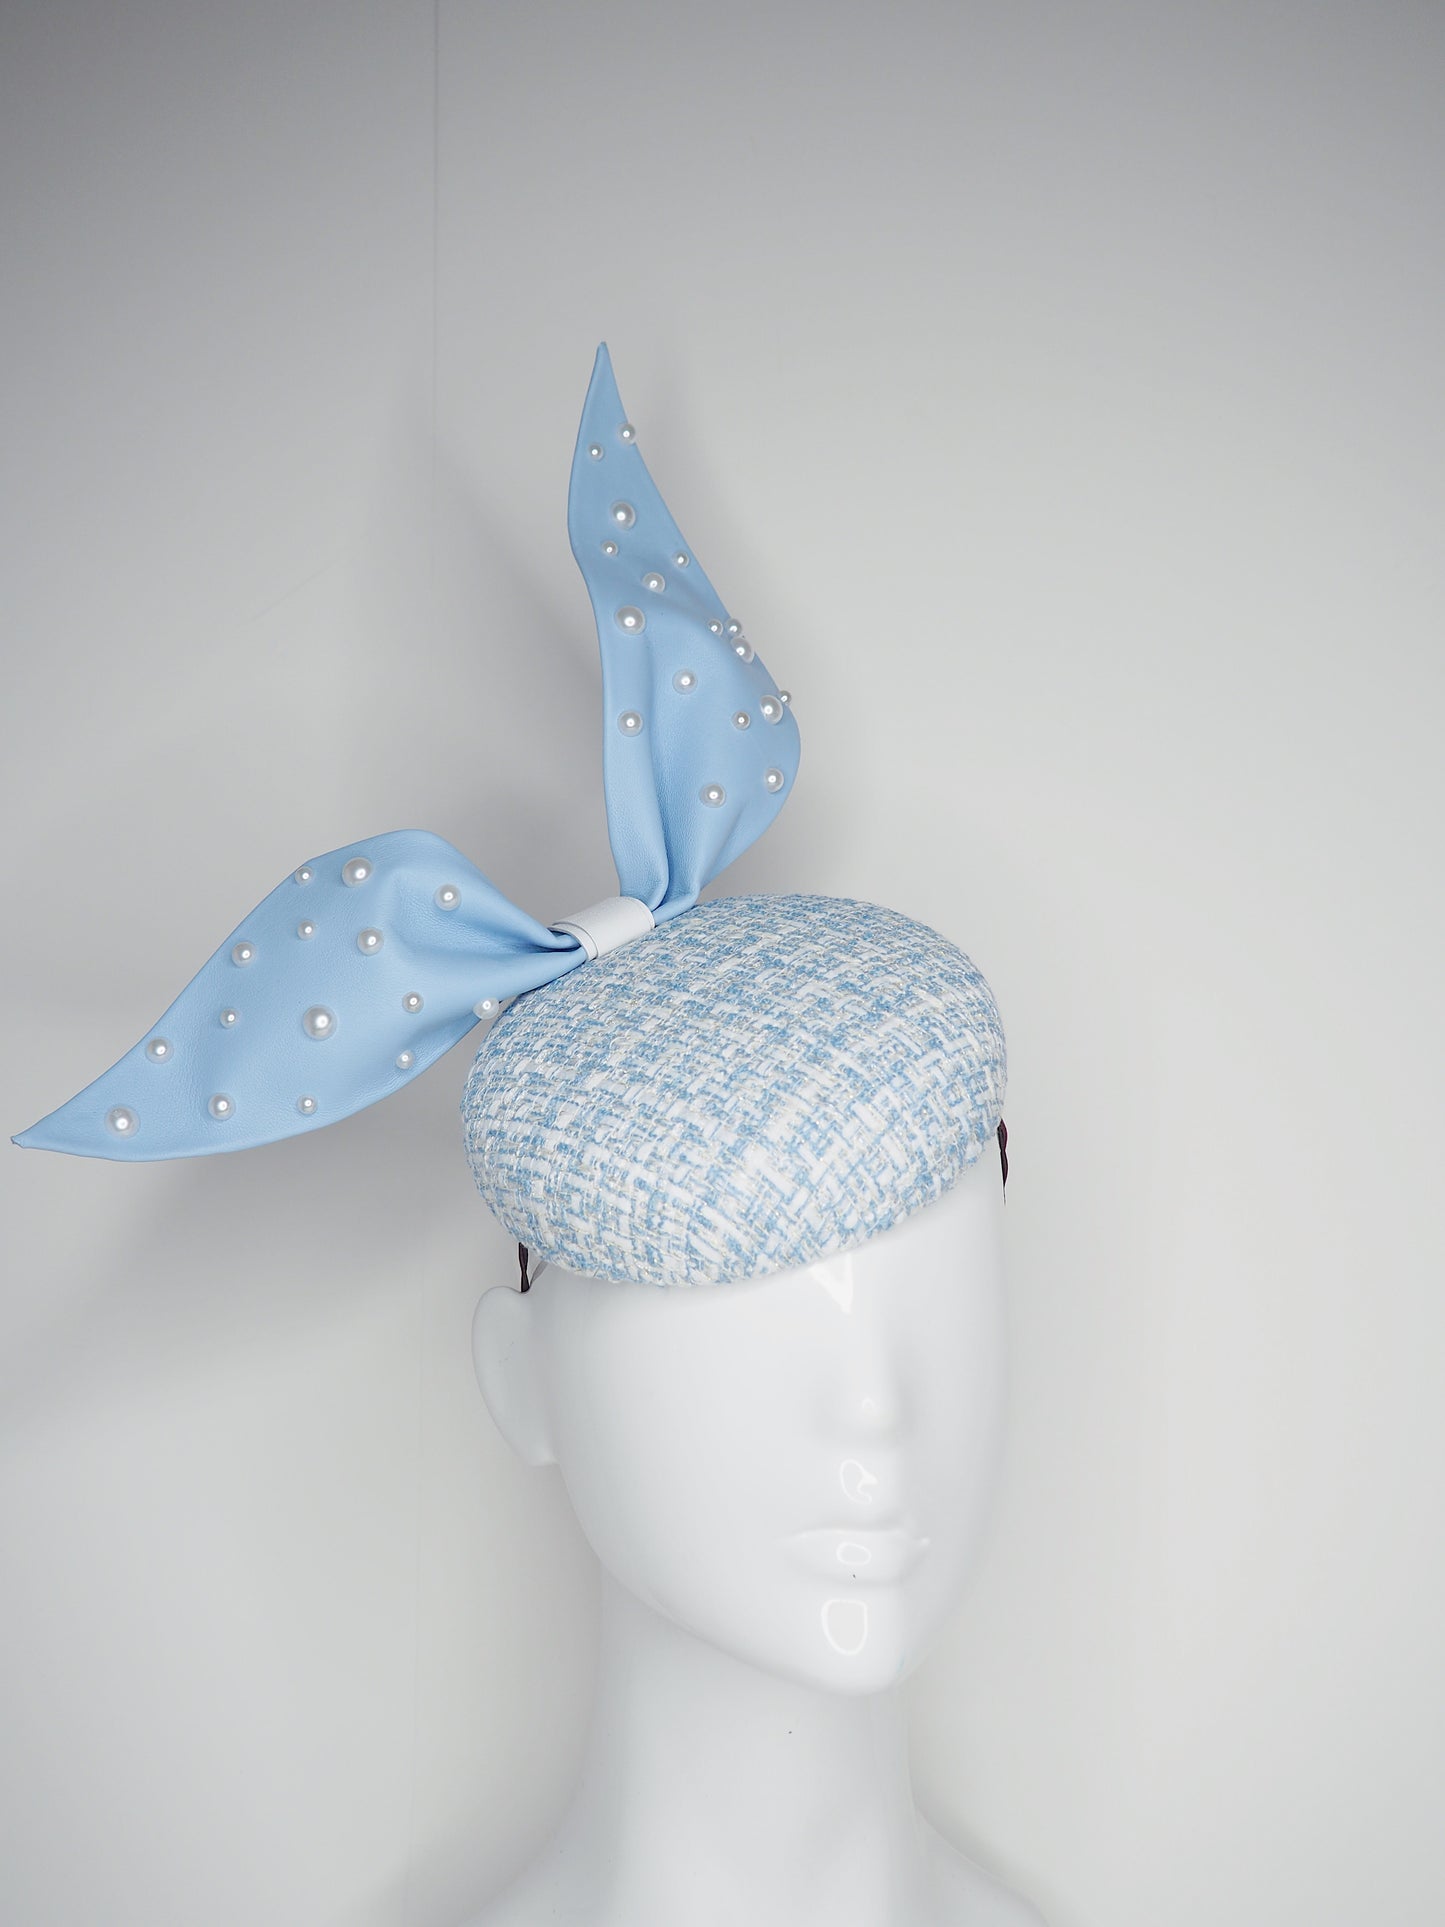 Blue pearl - Blue wired leather bow with pearl feature on a white and blue tweed button base with lurex flecks